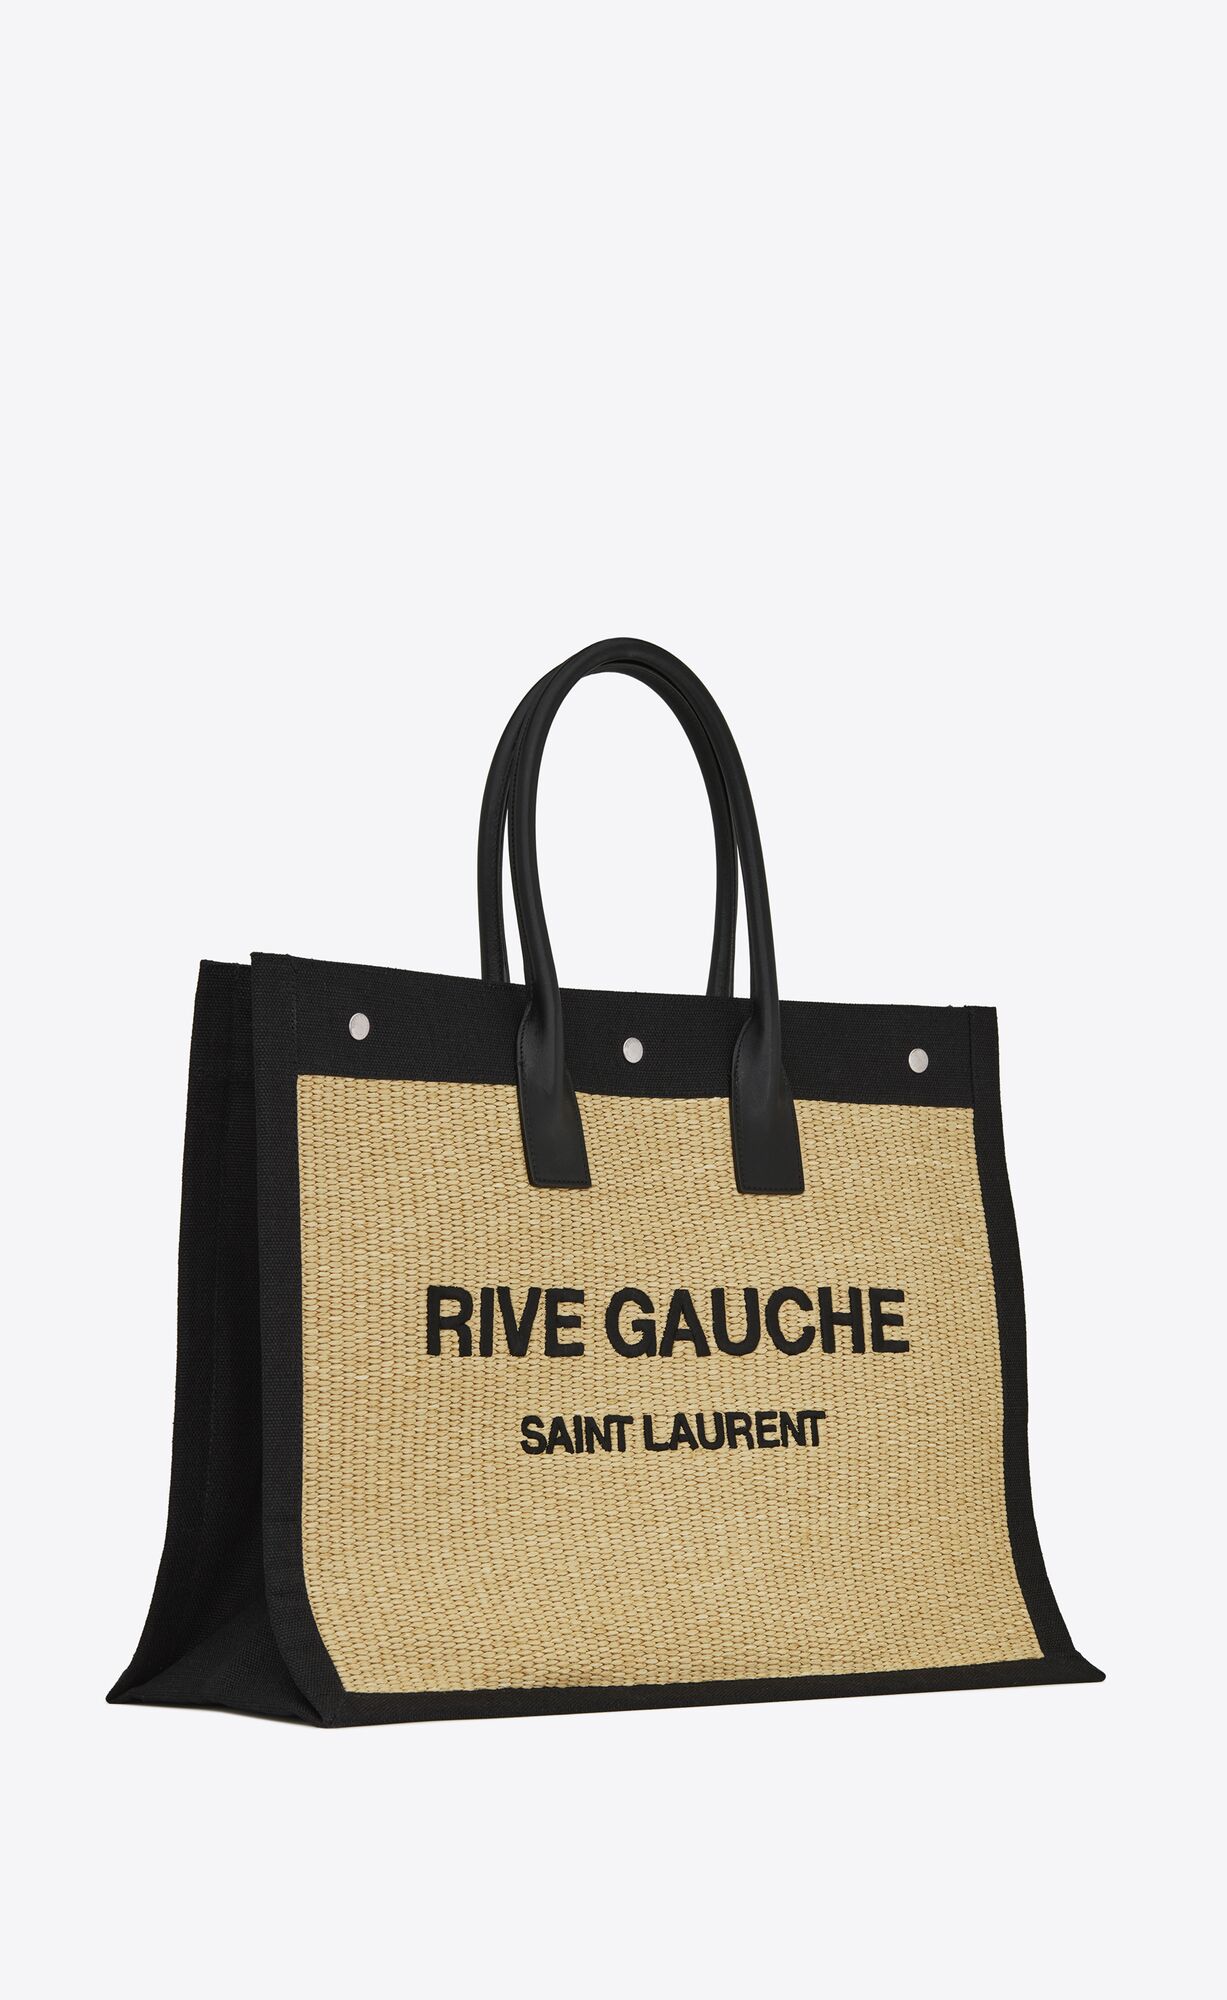 RIVE GAUCHE tote bag in embroidered raffia and leather | Saint Laurent ...